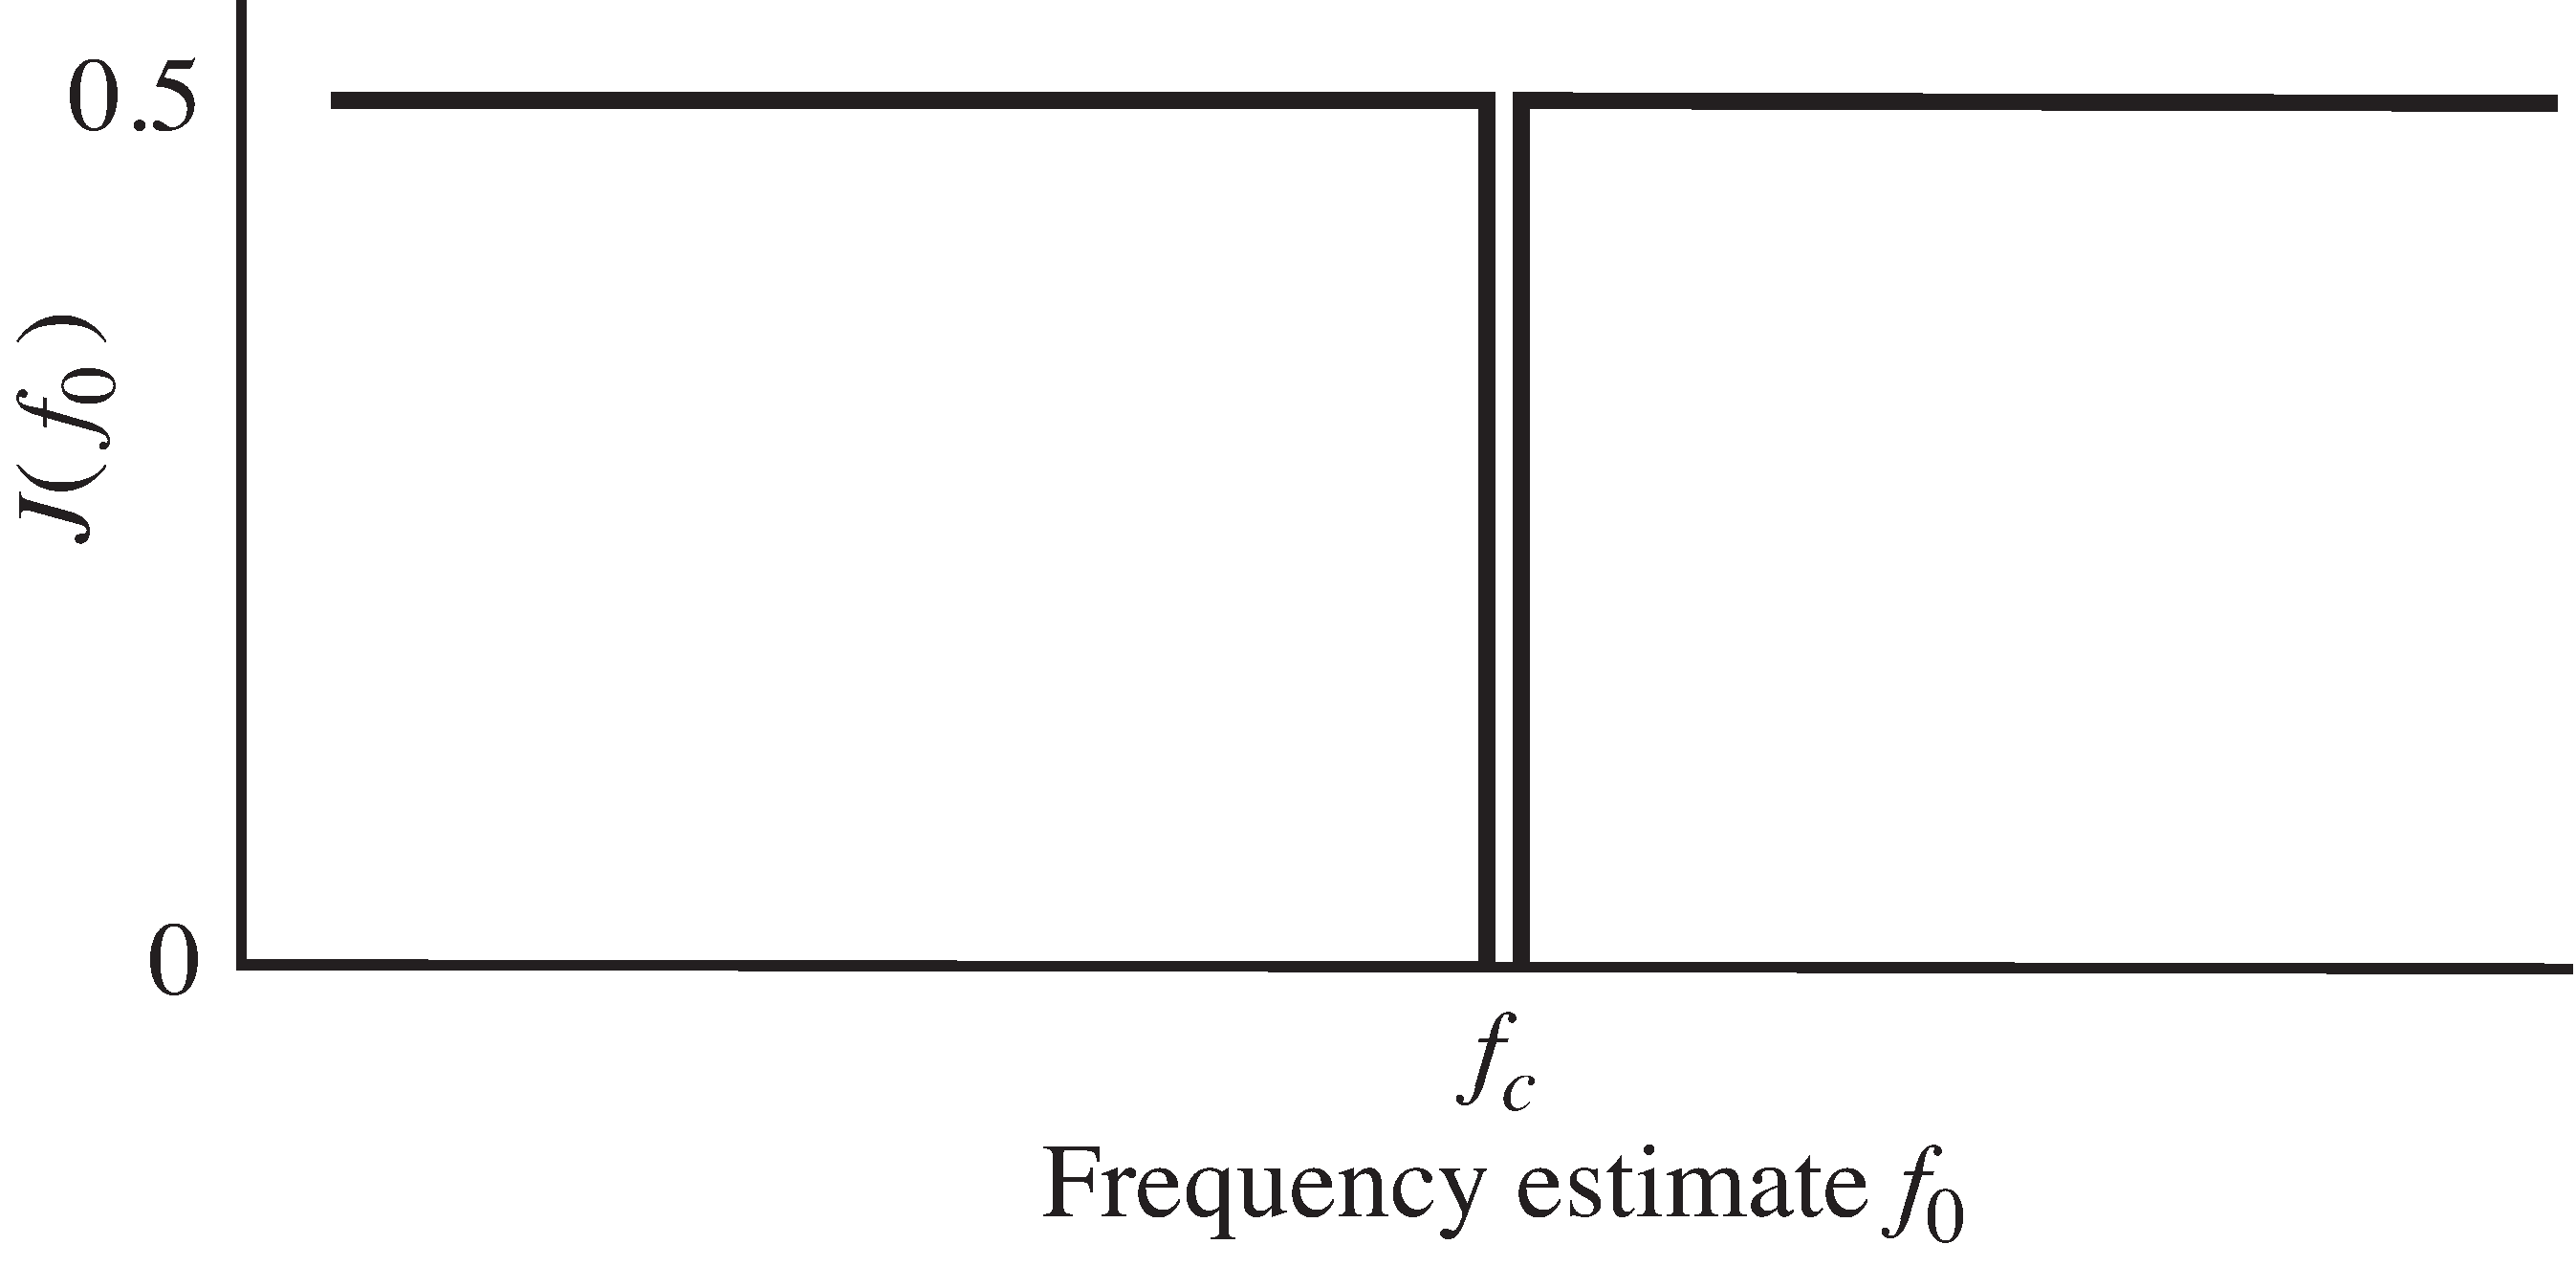 The error surface corresponding to the frequency estimation performance function Equation 40 is flat everywhere except for a deep crevice at the correct answer f_0=f_c.